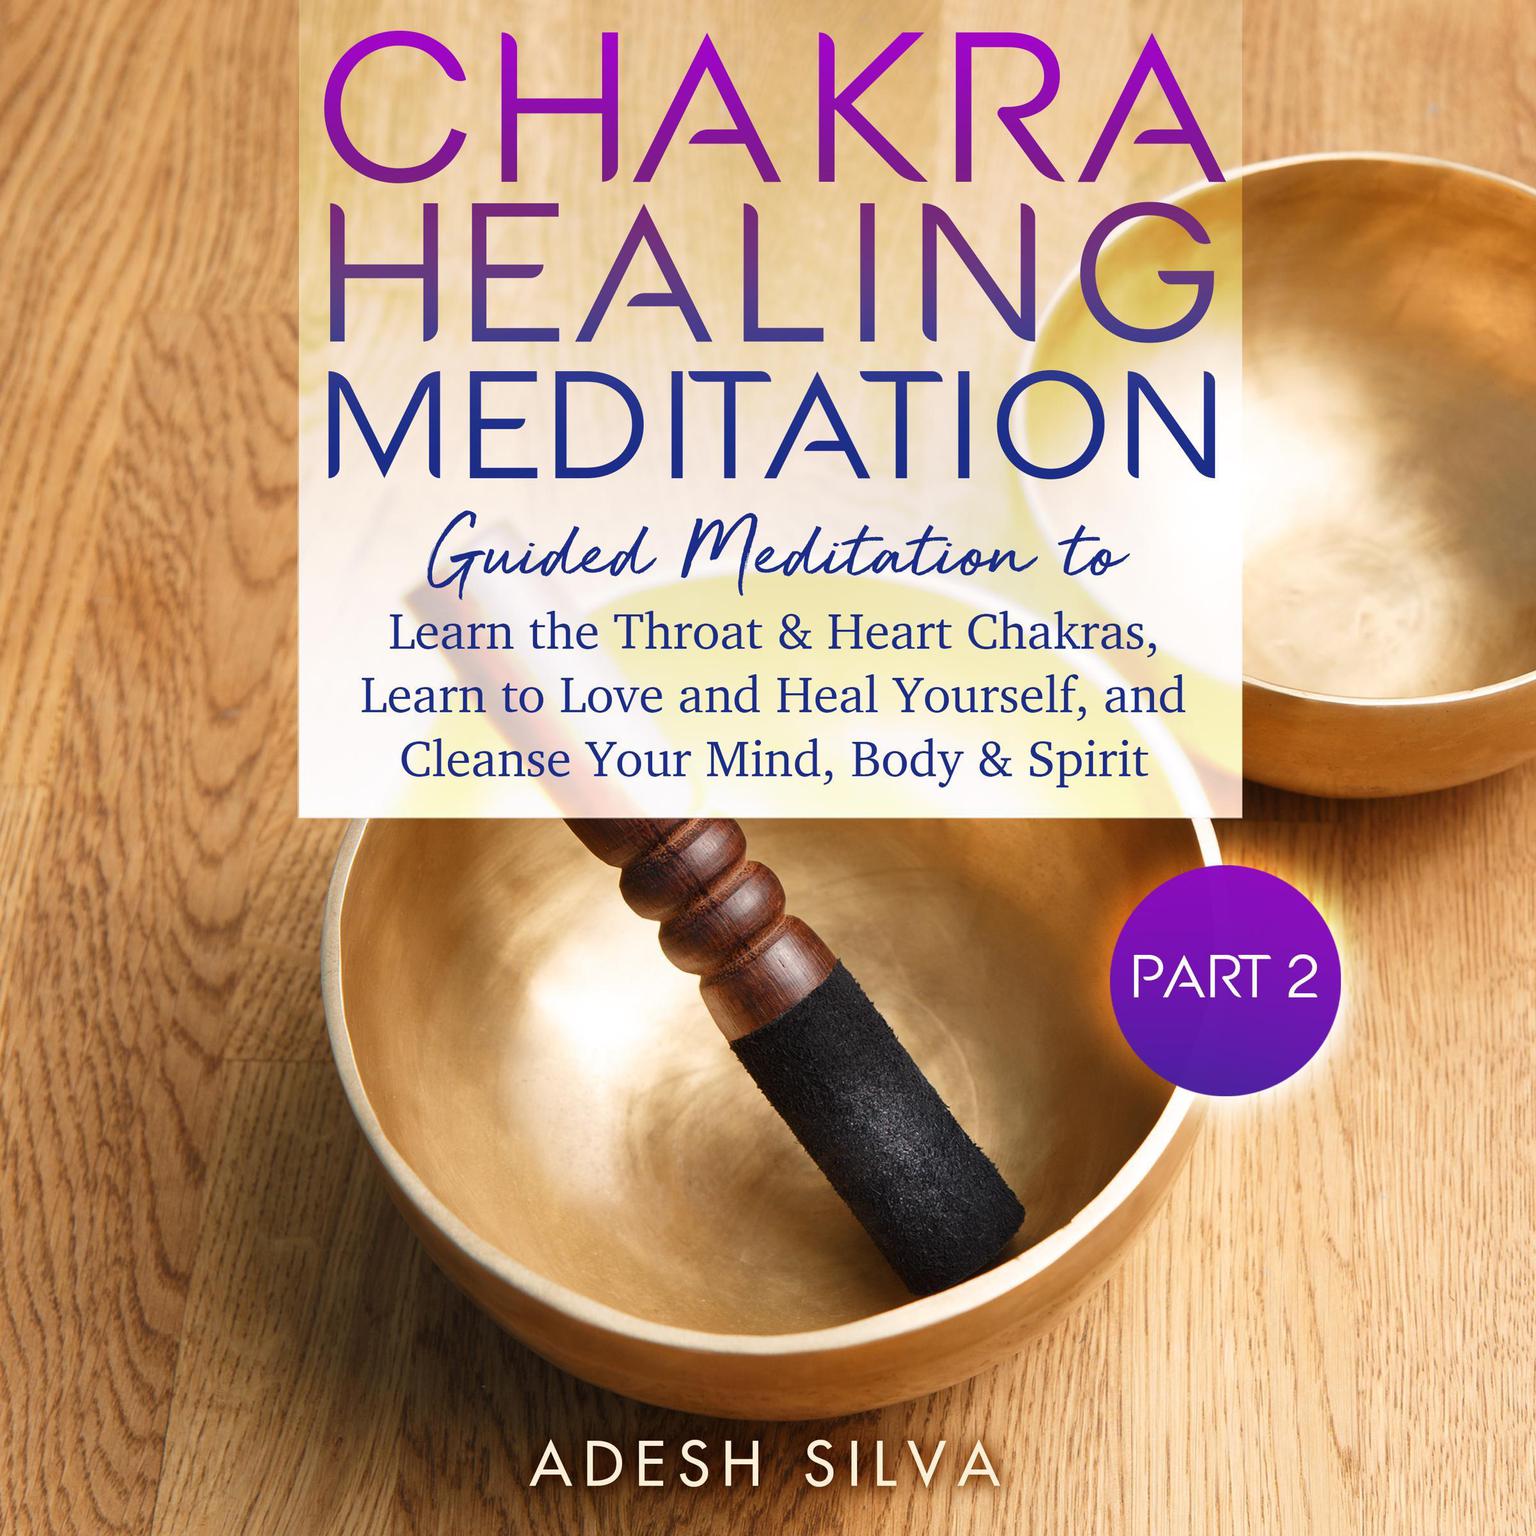 Chakra Healing Meditation Part 2: : Guided Meditation To Learn The Throat & Heart Chakras, Learn To Love and Heal Yourself, and Cleanse Your Mind, Body & Spirit Audiobook, by Adesh Silva